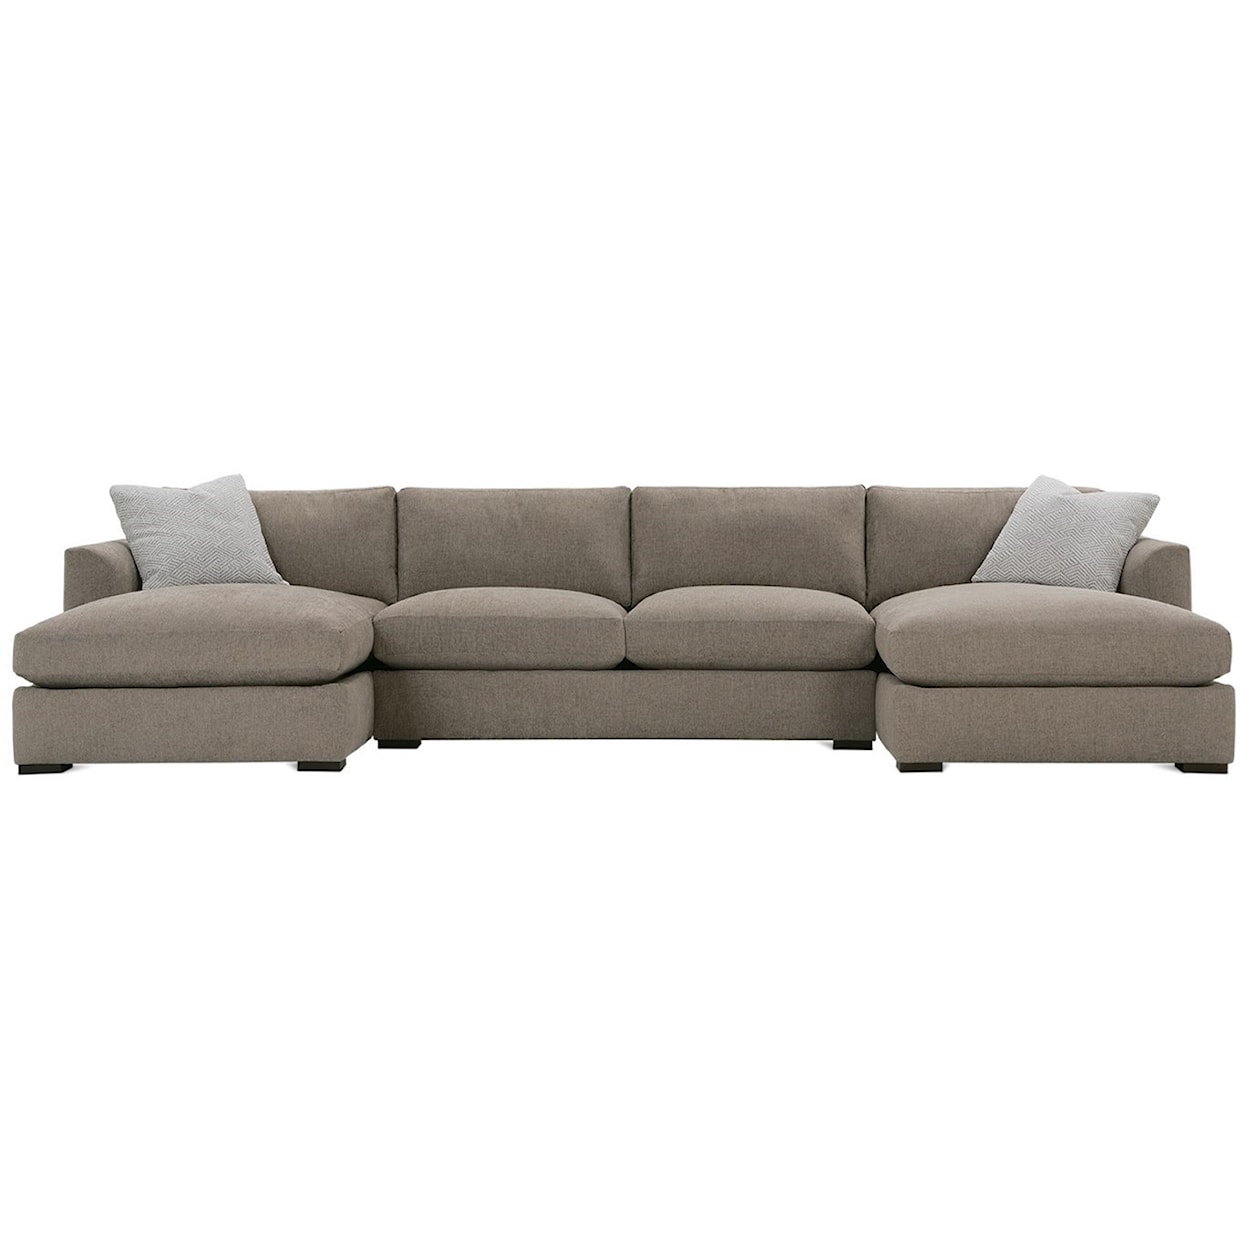 Rowe P603 Derby Sectional Sofa